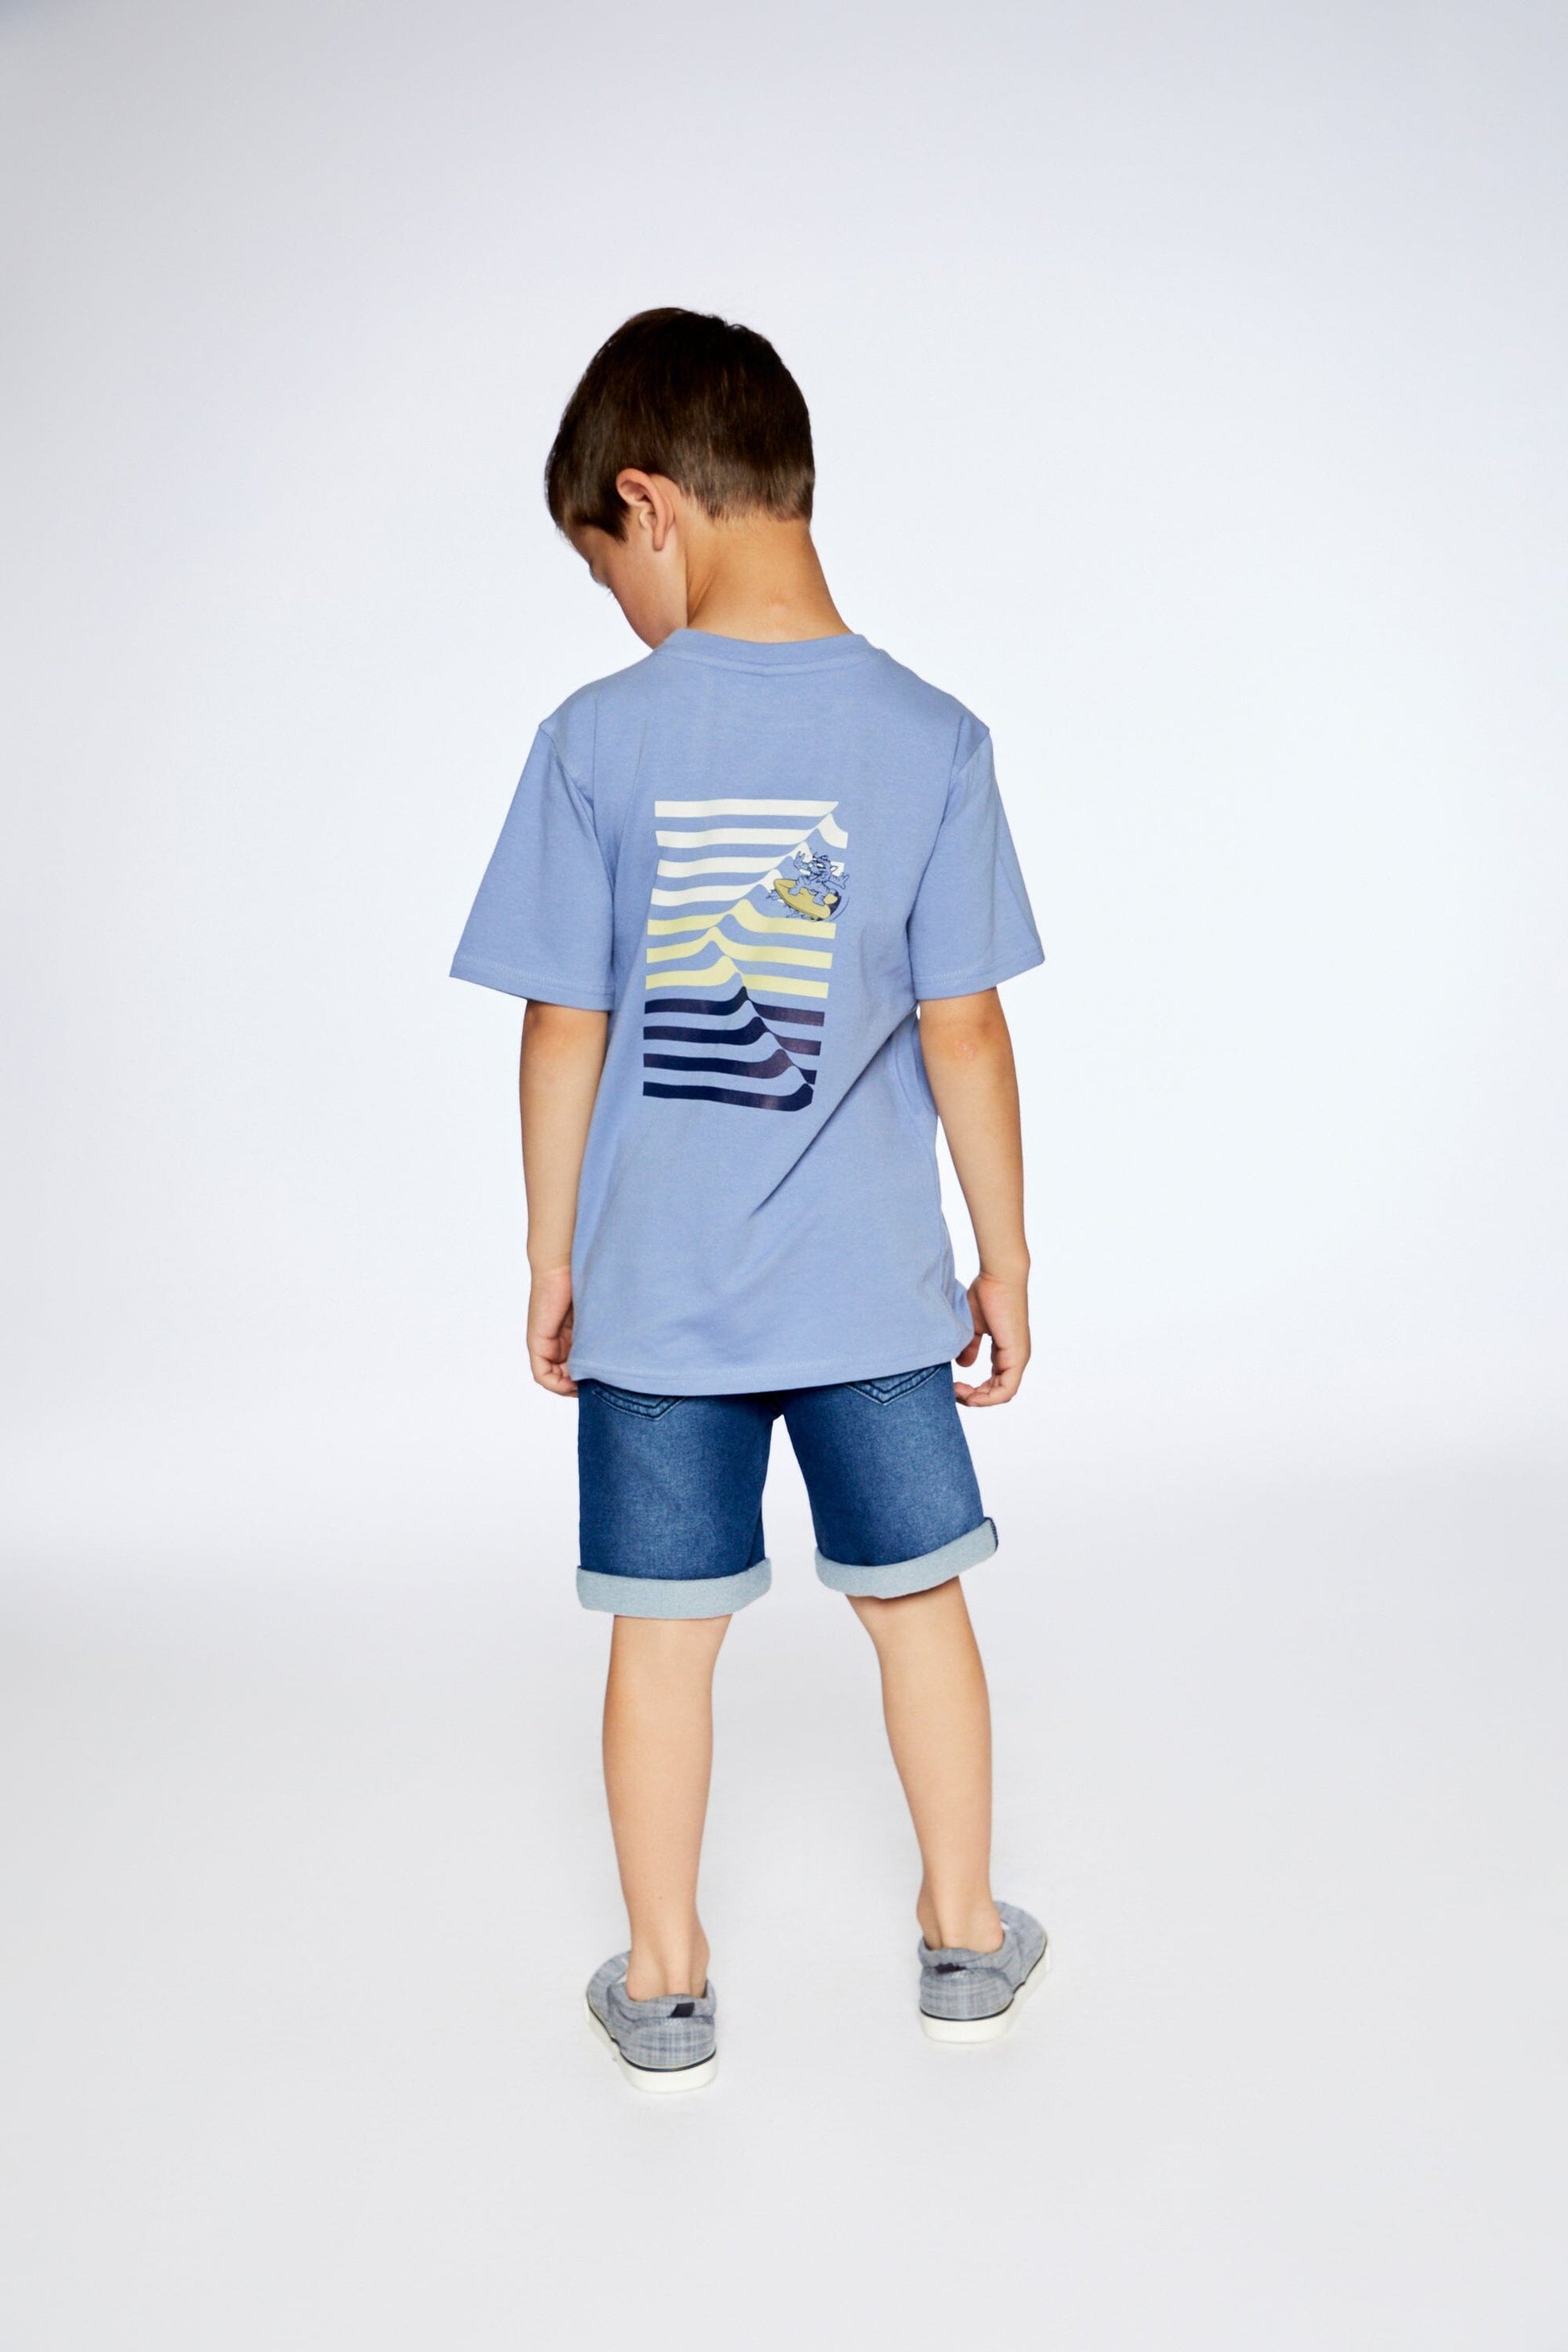 Organic Cotton T-Shirt Blue Printed On Front And Back-1